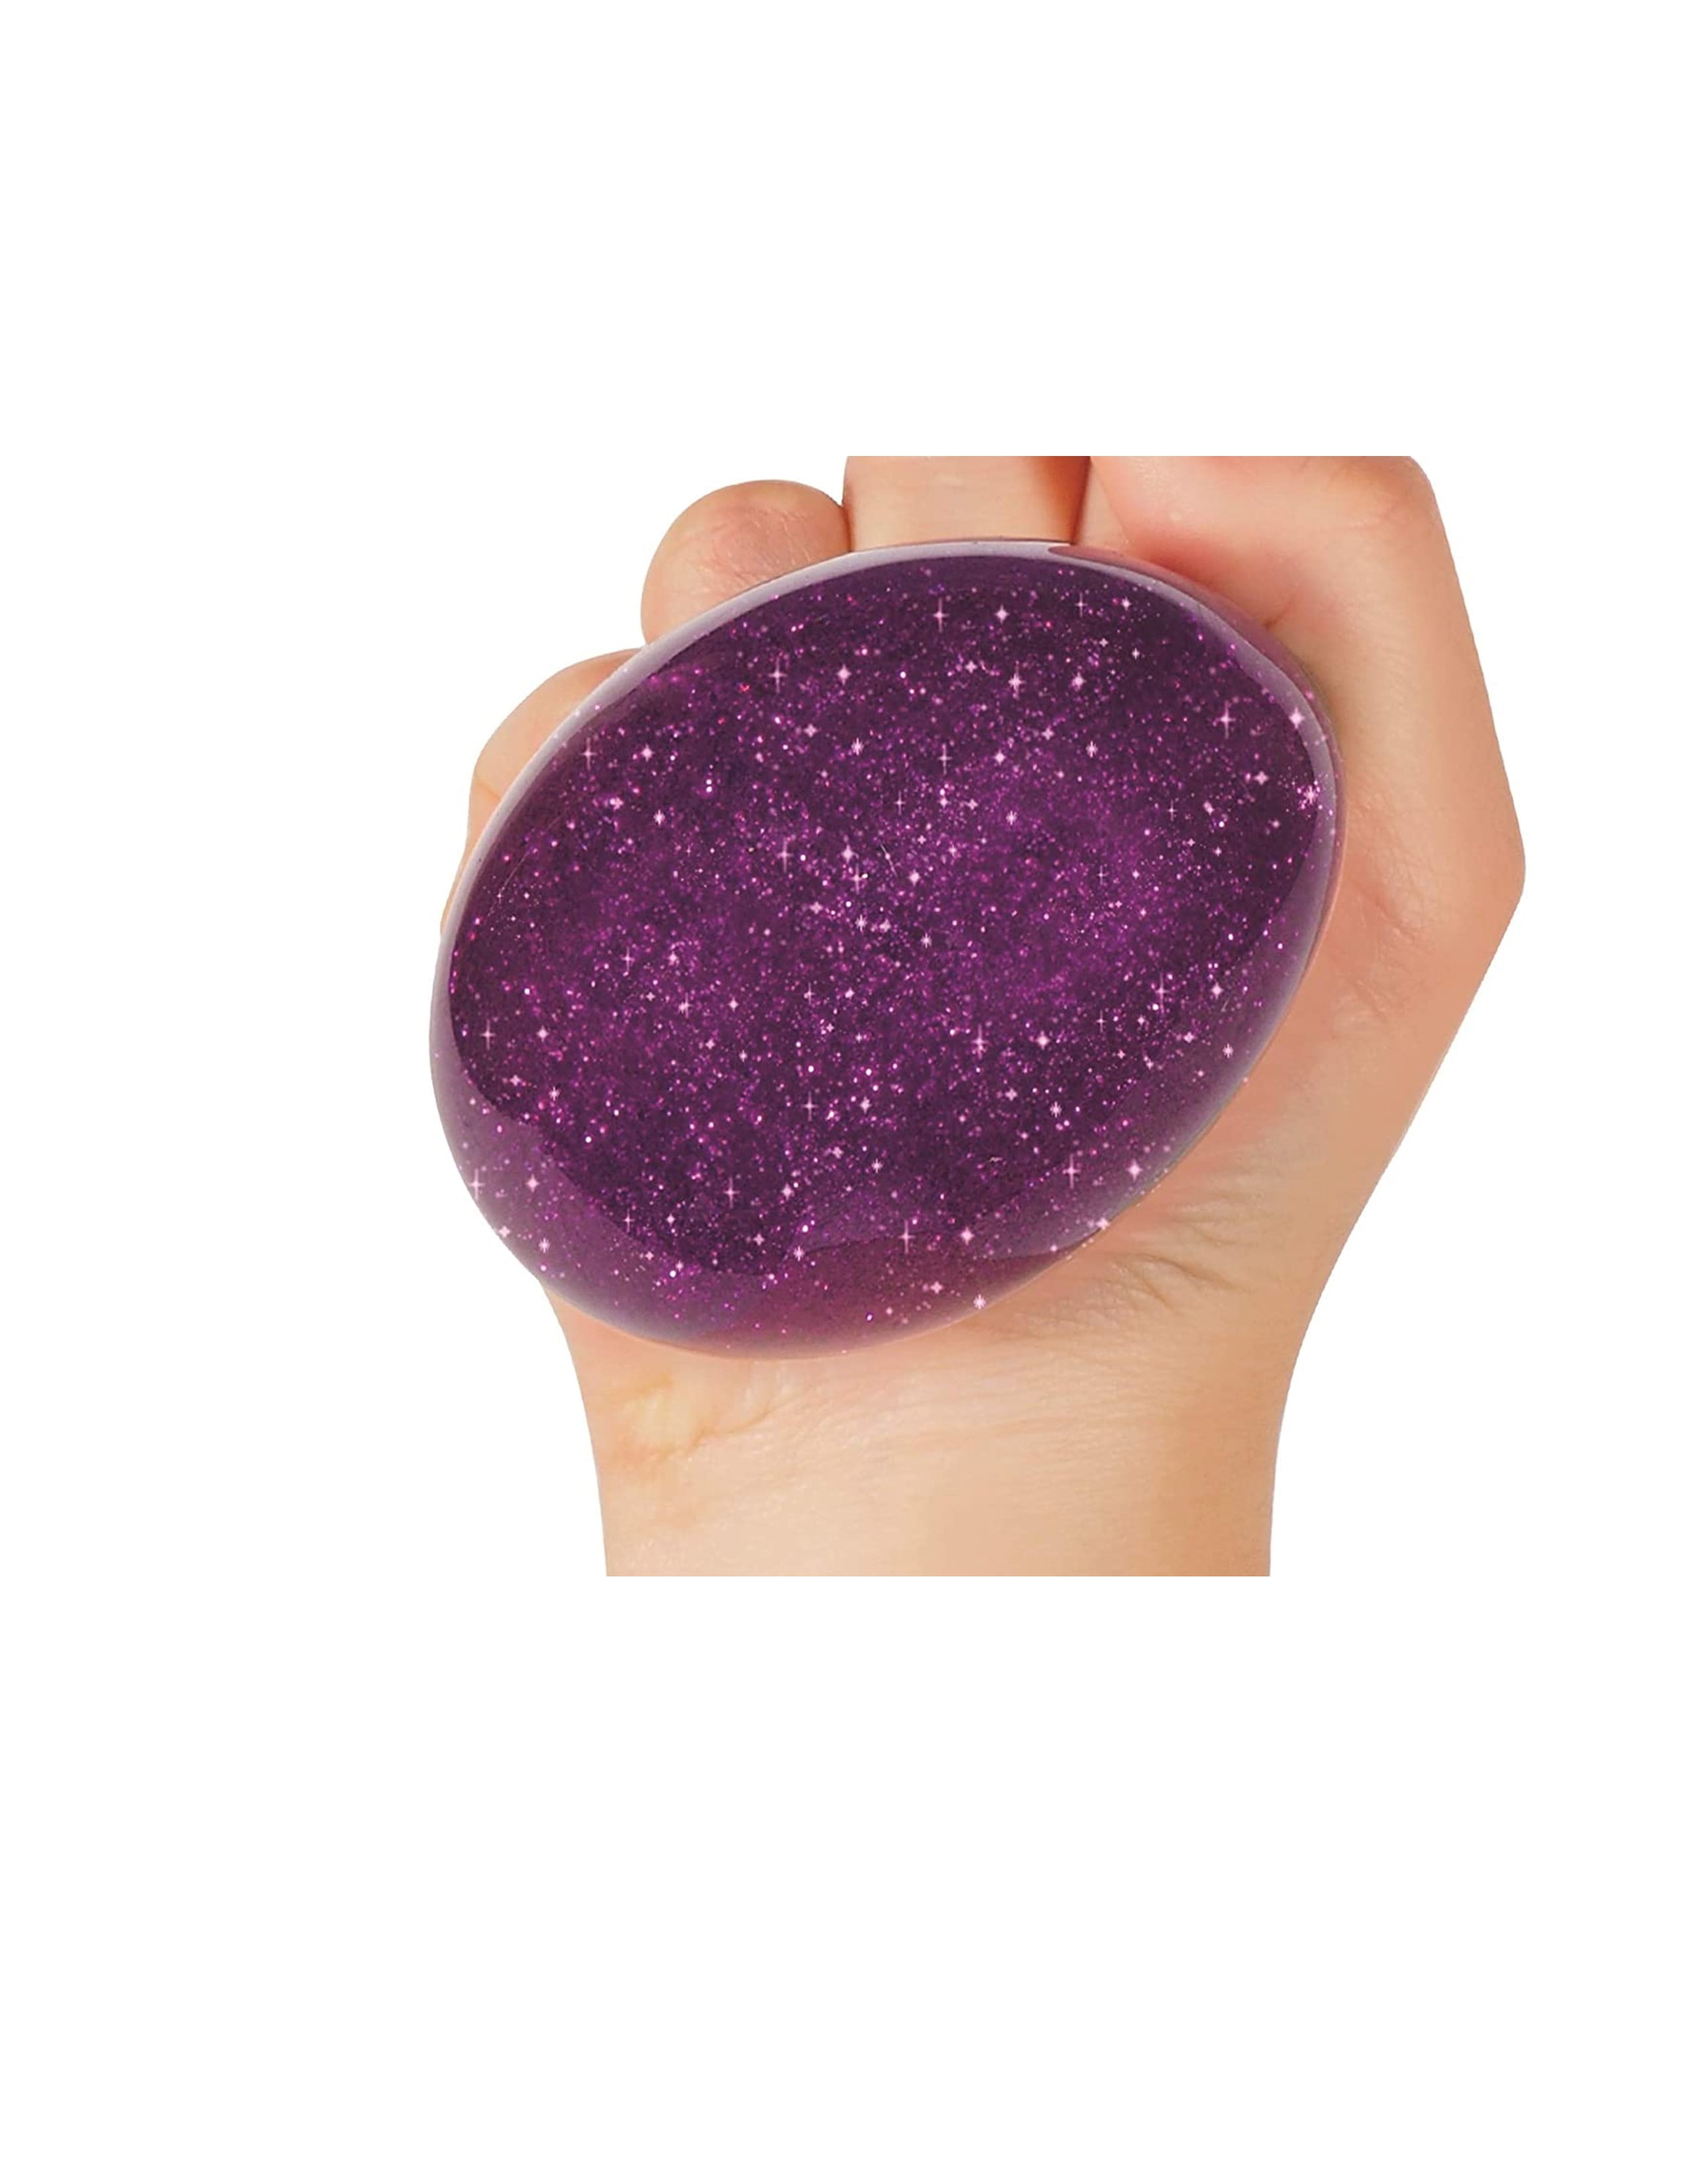 udløb Ruckus faktureres Nee-Doh Schylling Stardust Shimmer Groovy Glob! Squishy, Squeezy, Stretchy  Stress Balls Blue, Red & Purple Complete Gift Set Party Bundle - 3 Pack -  Walmart.com